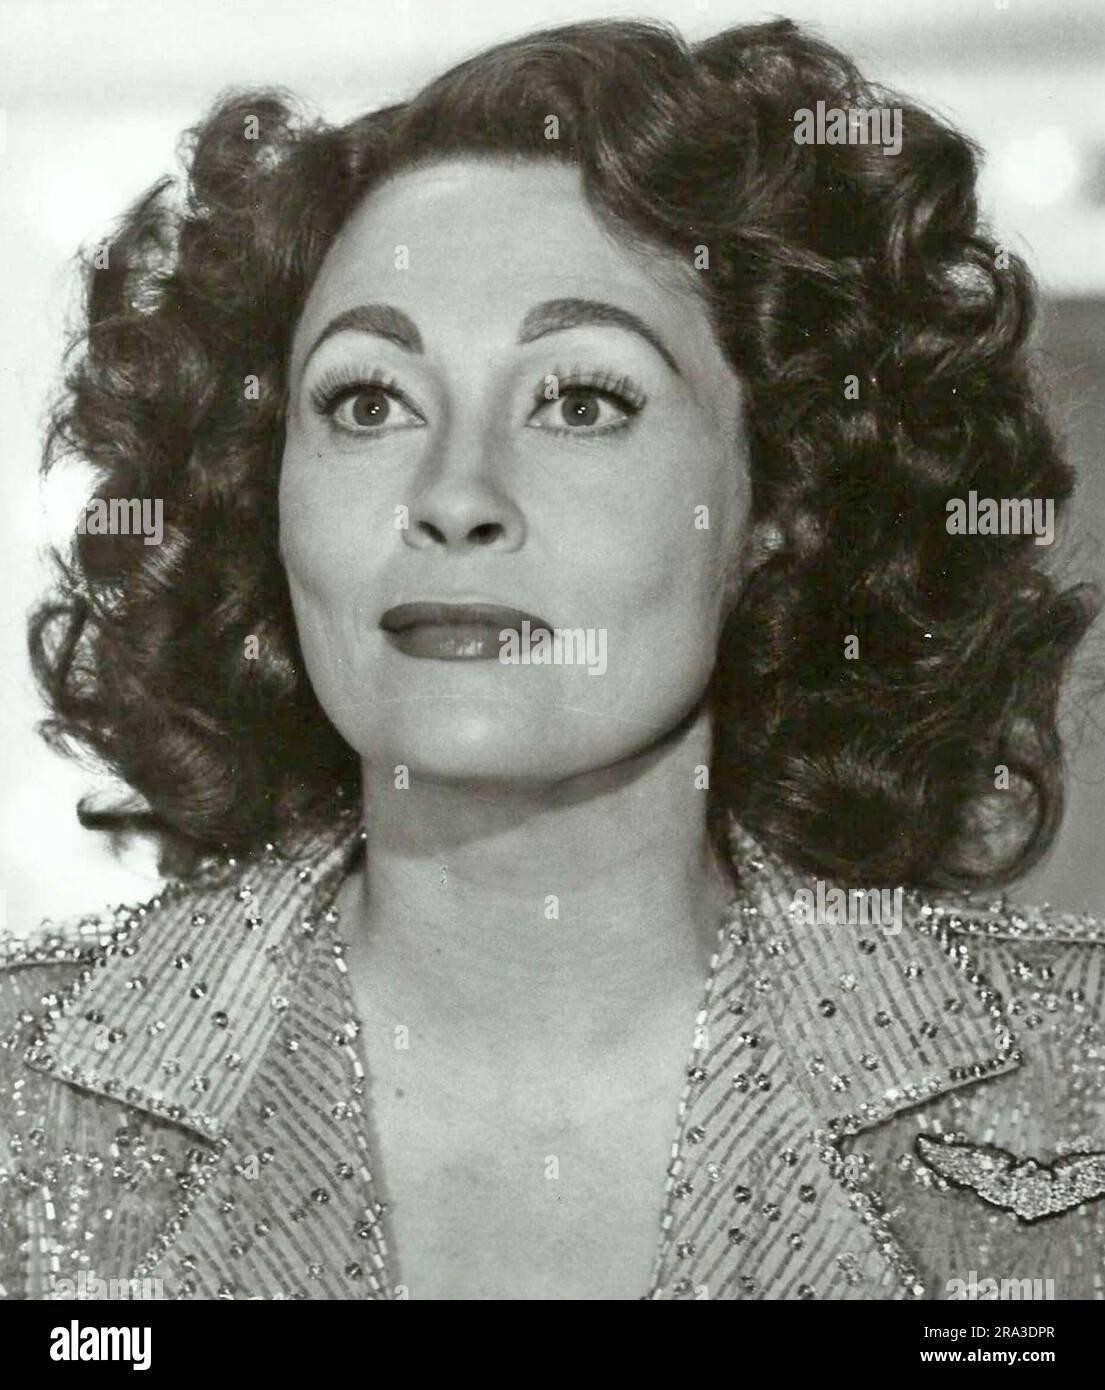 MOMMIE DEAREST 1981 Paramount Pictures film avec Faye Dunaway comme Joan Crawford Banque D'Images